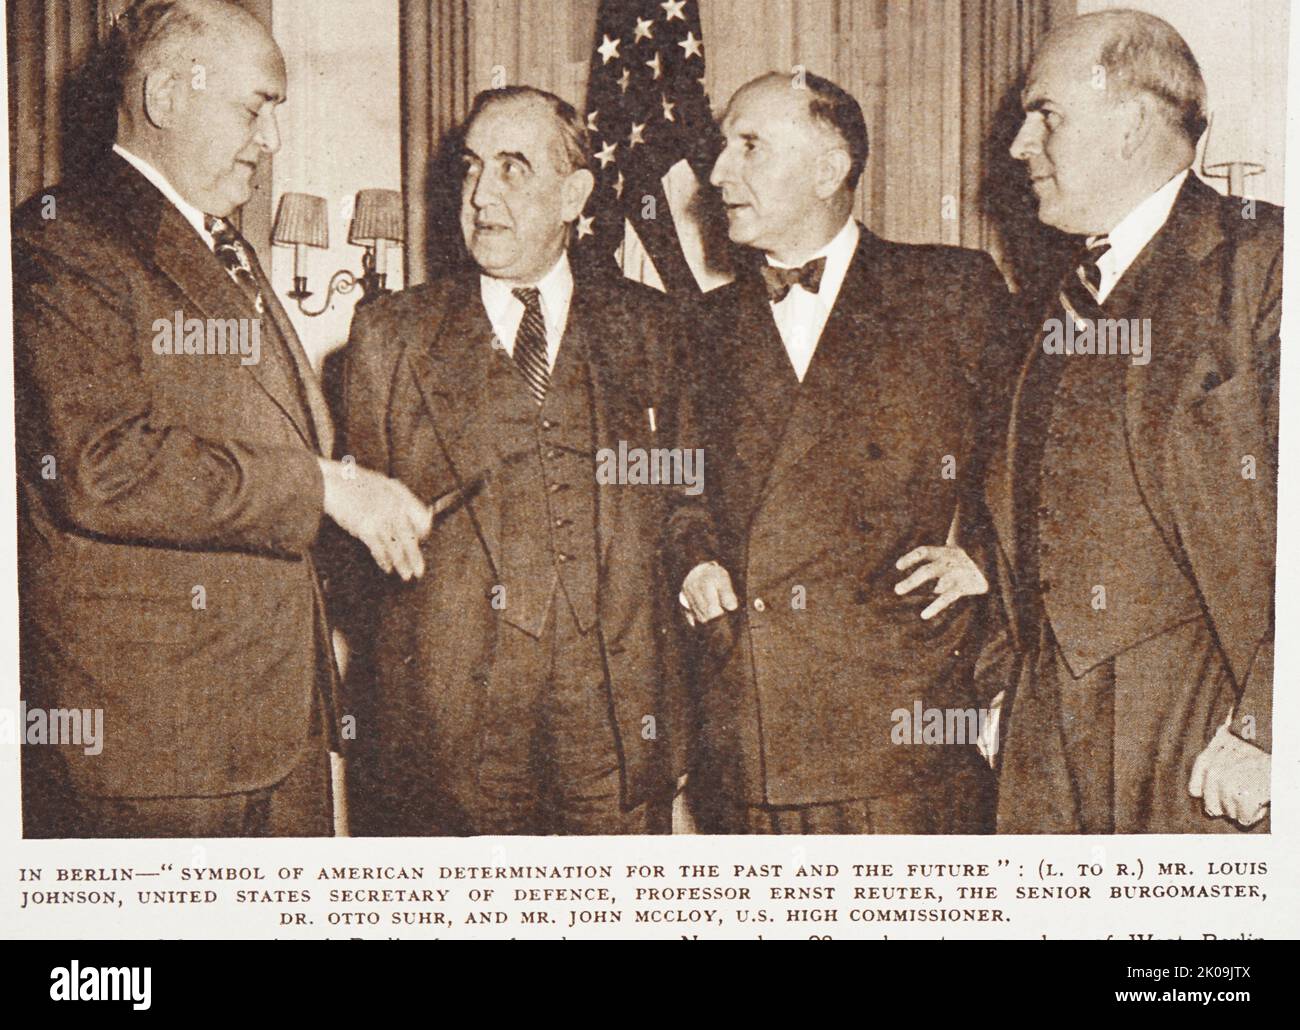 Louis Johnson, United States secretary of defence; Prof. Ernst Reuter; Otto Ernst Heinrich Hermann Suhr, senior Burgomaster; and John Jay McCloy, U.S. High Commisioner; in Berlin. Louis Arthur Johnson (January 10, 1891 - April 24, 1966) was an American politician and attorney who served as the second United States Secretary of Defense from 1949 to 1950. Ernst Rudolf Johannes Reuter (29 July 1889 - 29 September 1953) was the mayor of West Berlin from 1948 to 1953, during the time of the Cold War. Otto Ernst Heinrich Hermann Suhr (17 August 1894 - 30 August 1957) was a German politician as a mem Stock Photo